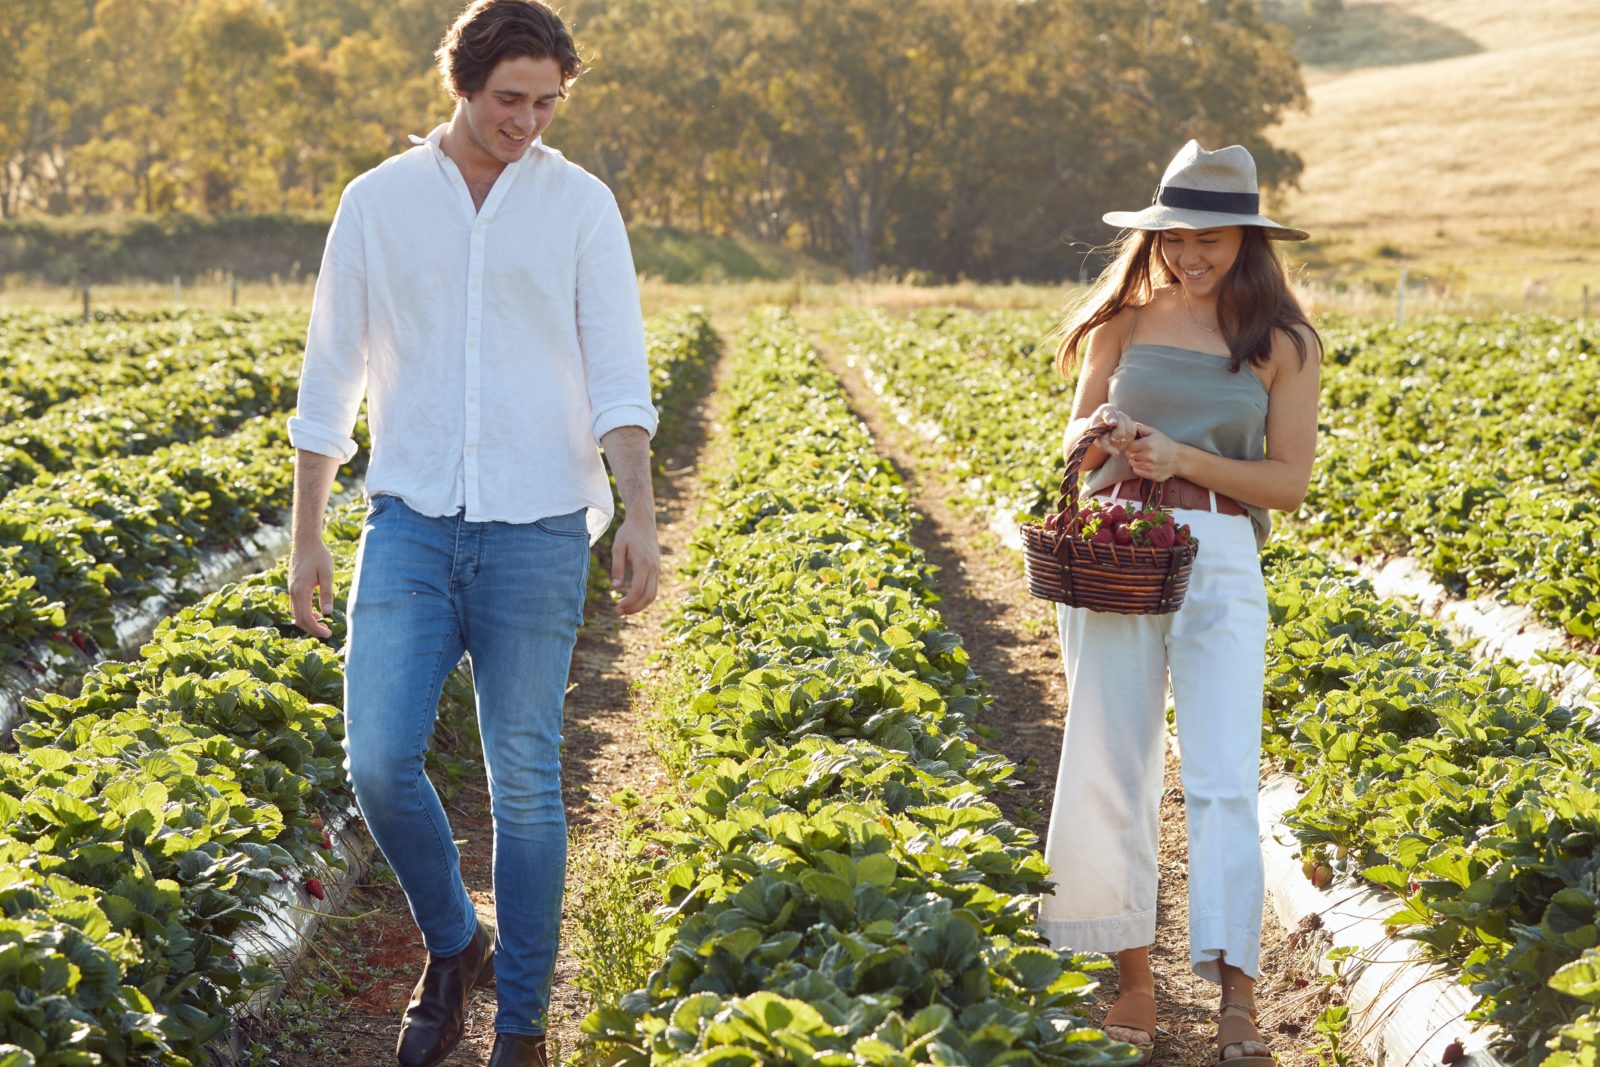 Young couple walking through the fields carrying a basket of strawberries